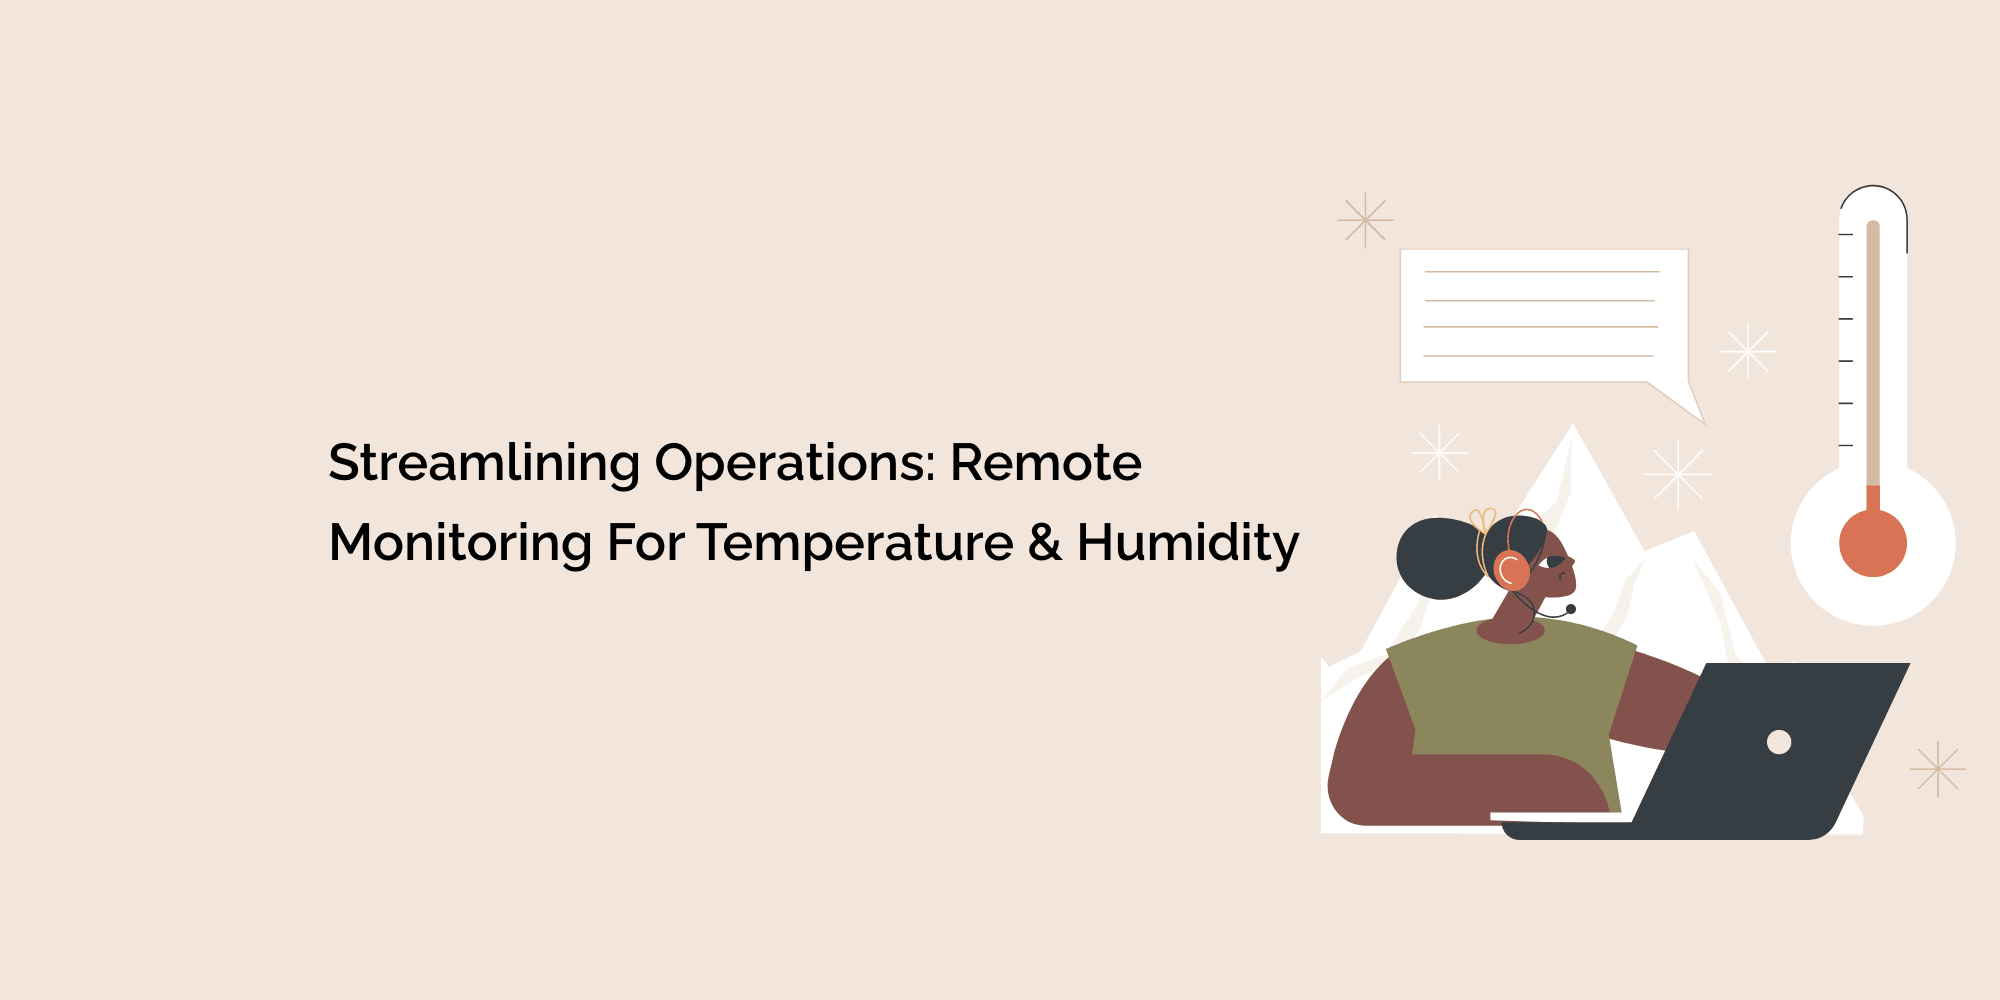 Streamlining Operations: Remote Monitoring for Temperature and Humidity